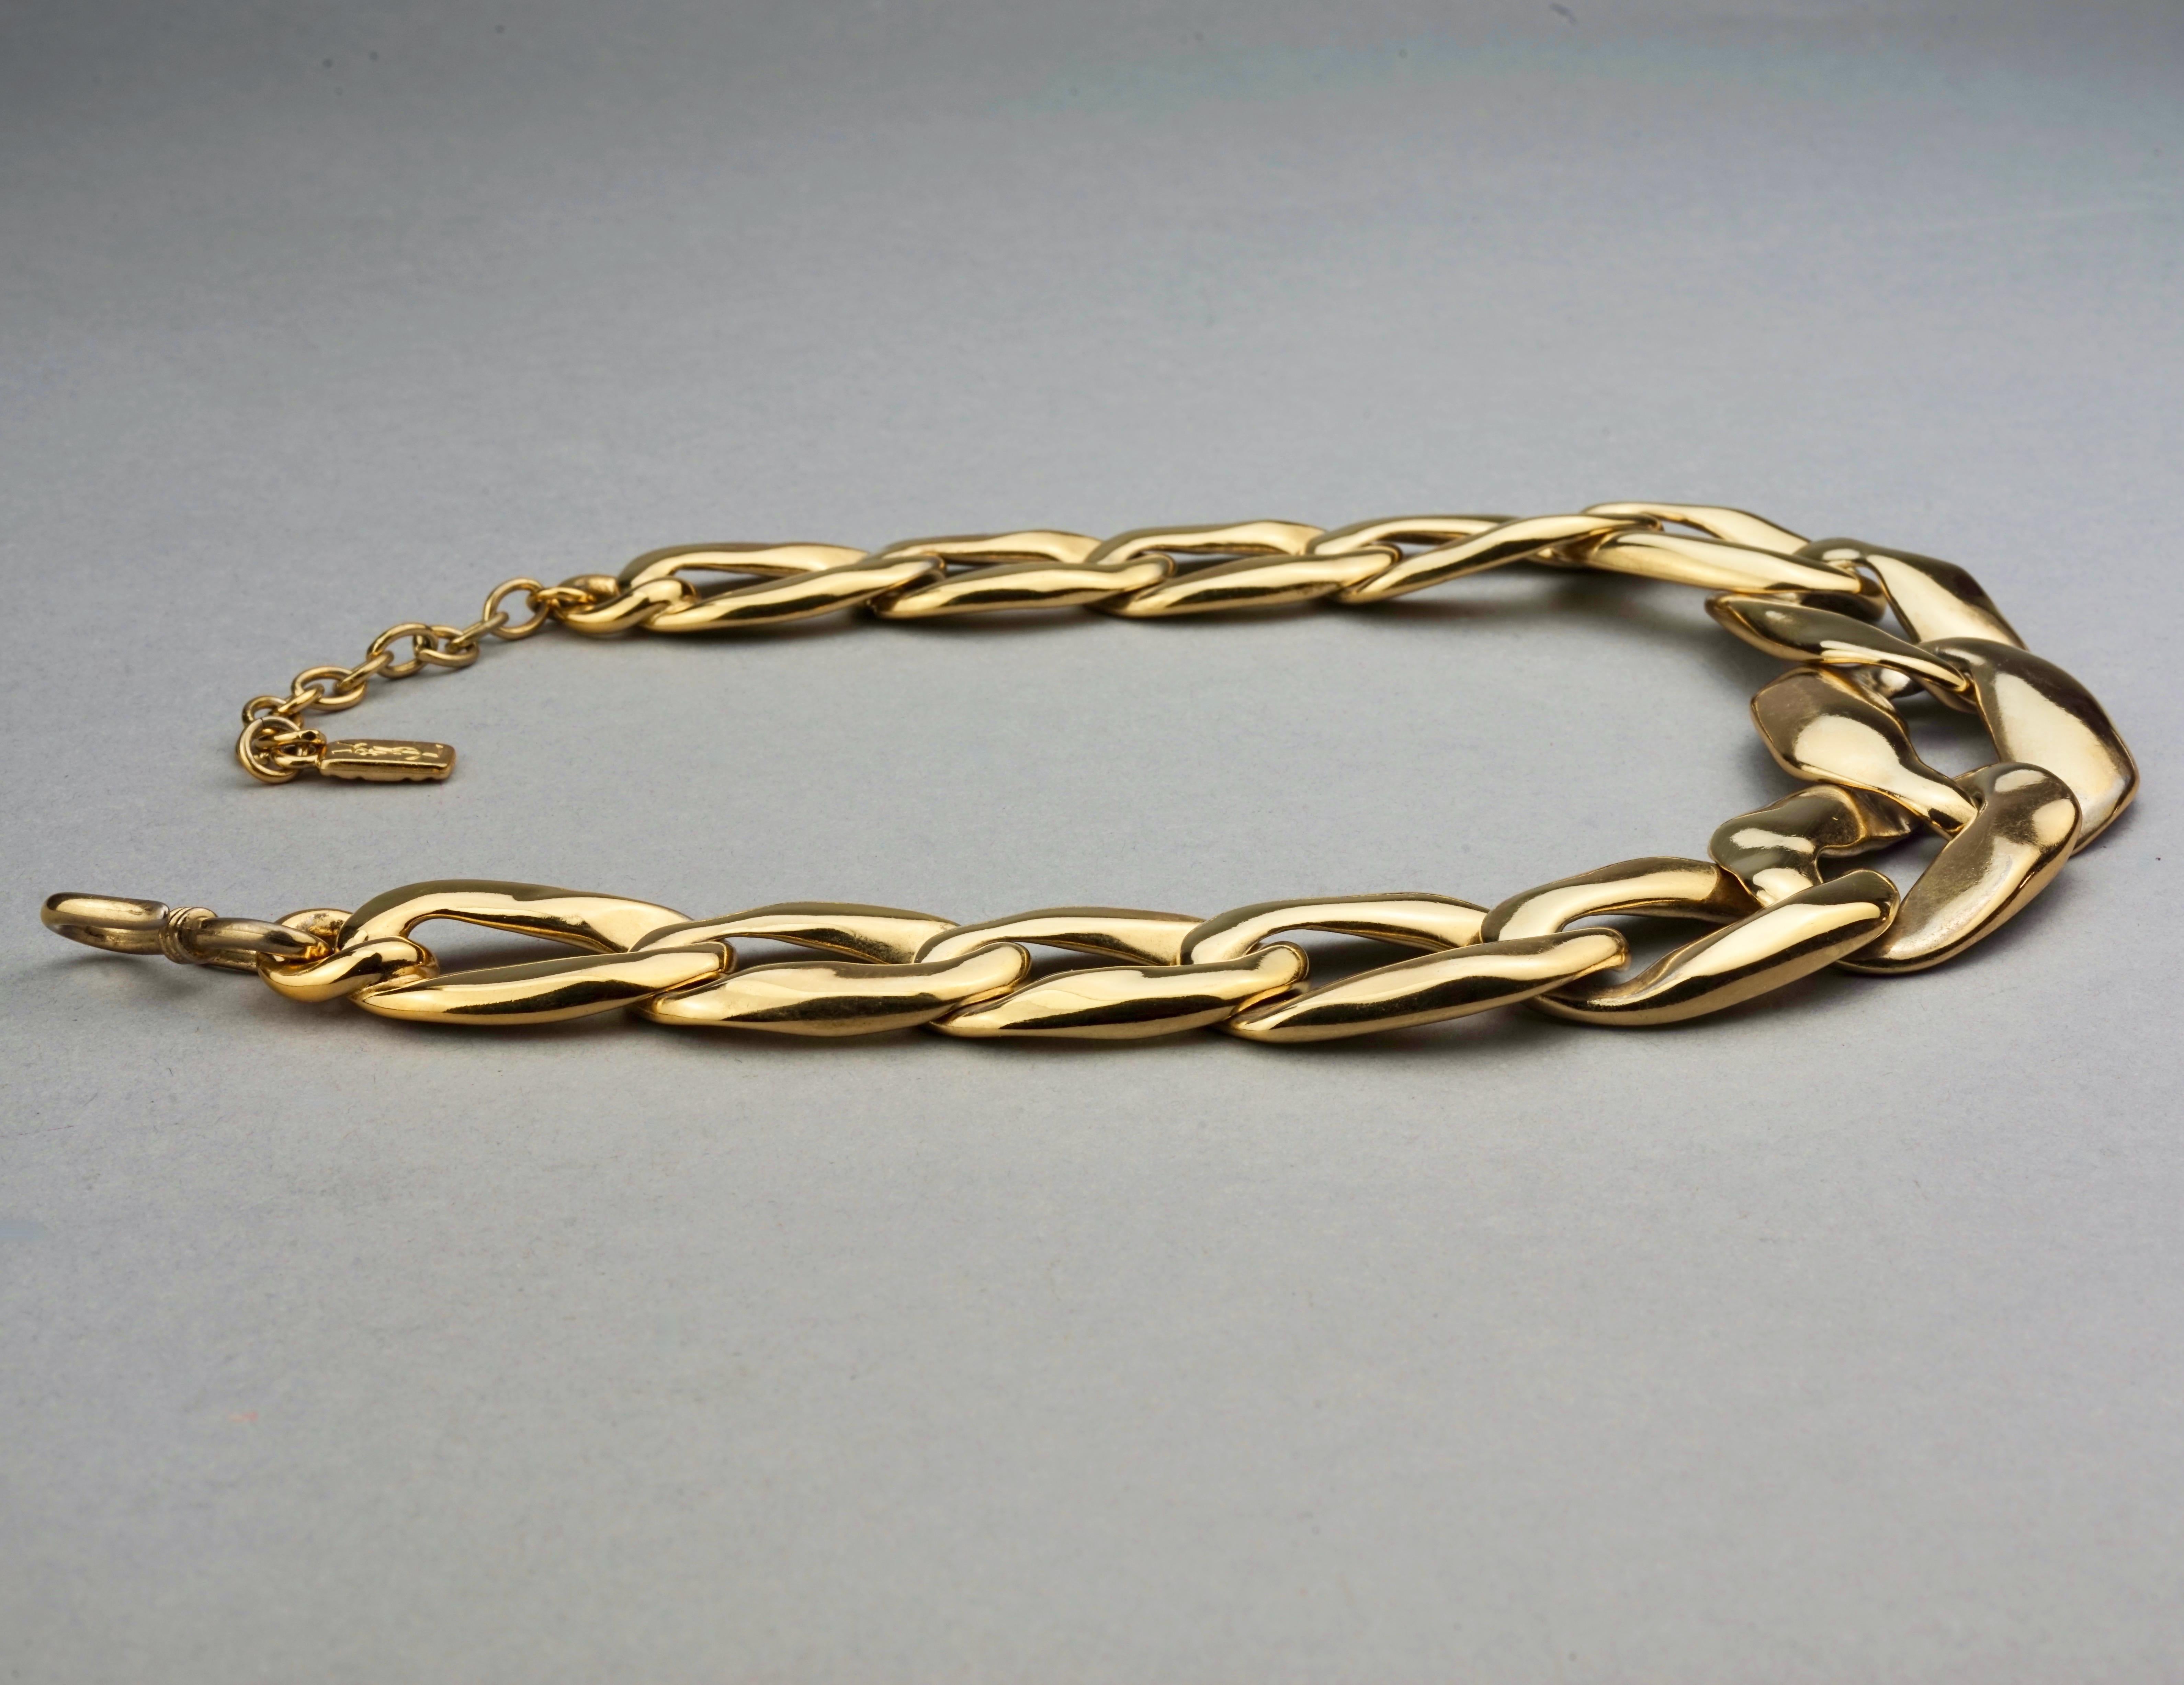 Vintage YVES SAINT LAURENT Ysl by Robert Goossens Chunky Chain Links Necklace 2